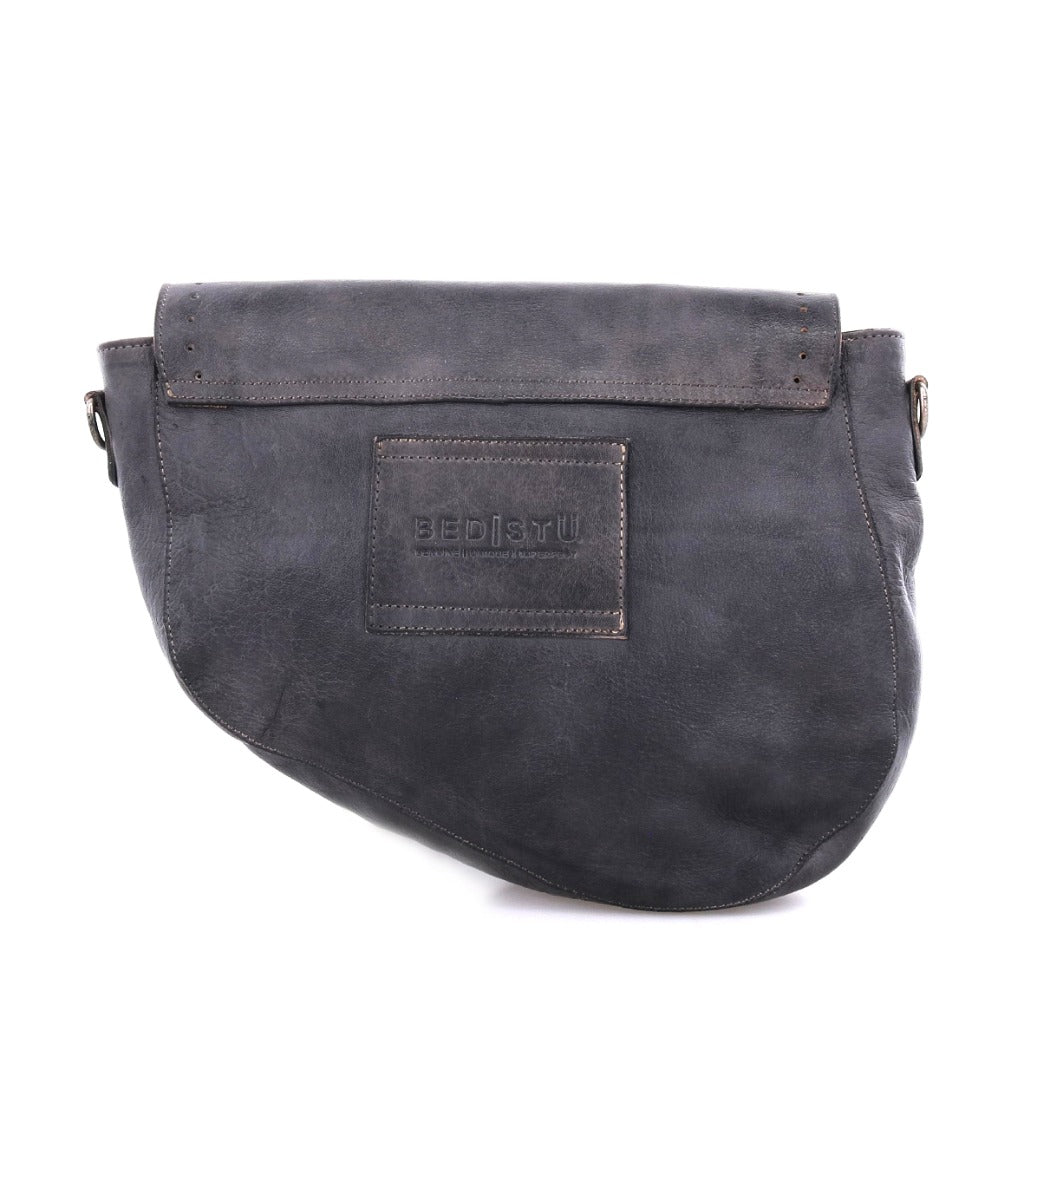 A black leather Priscilla bag with the word Bed Stu on it.